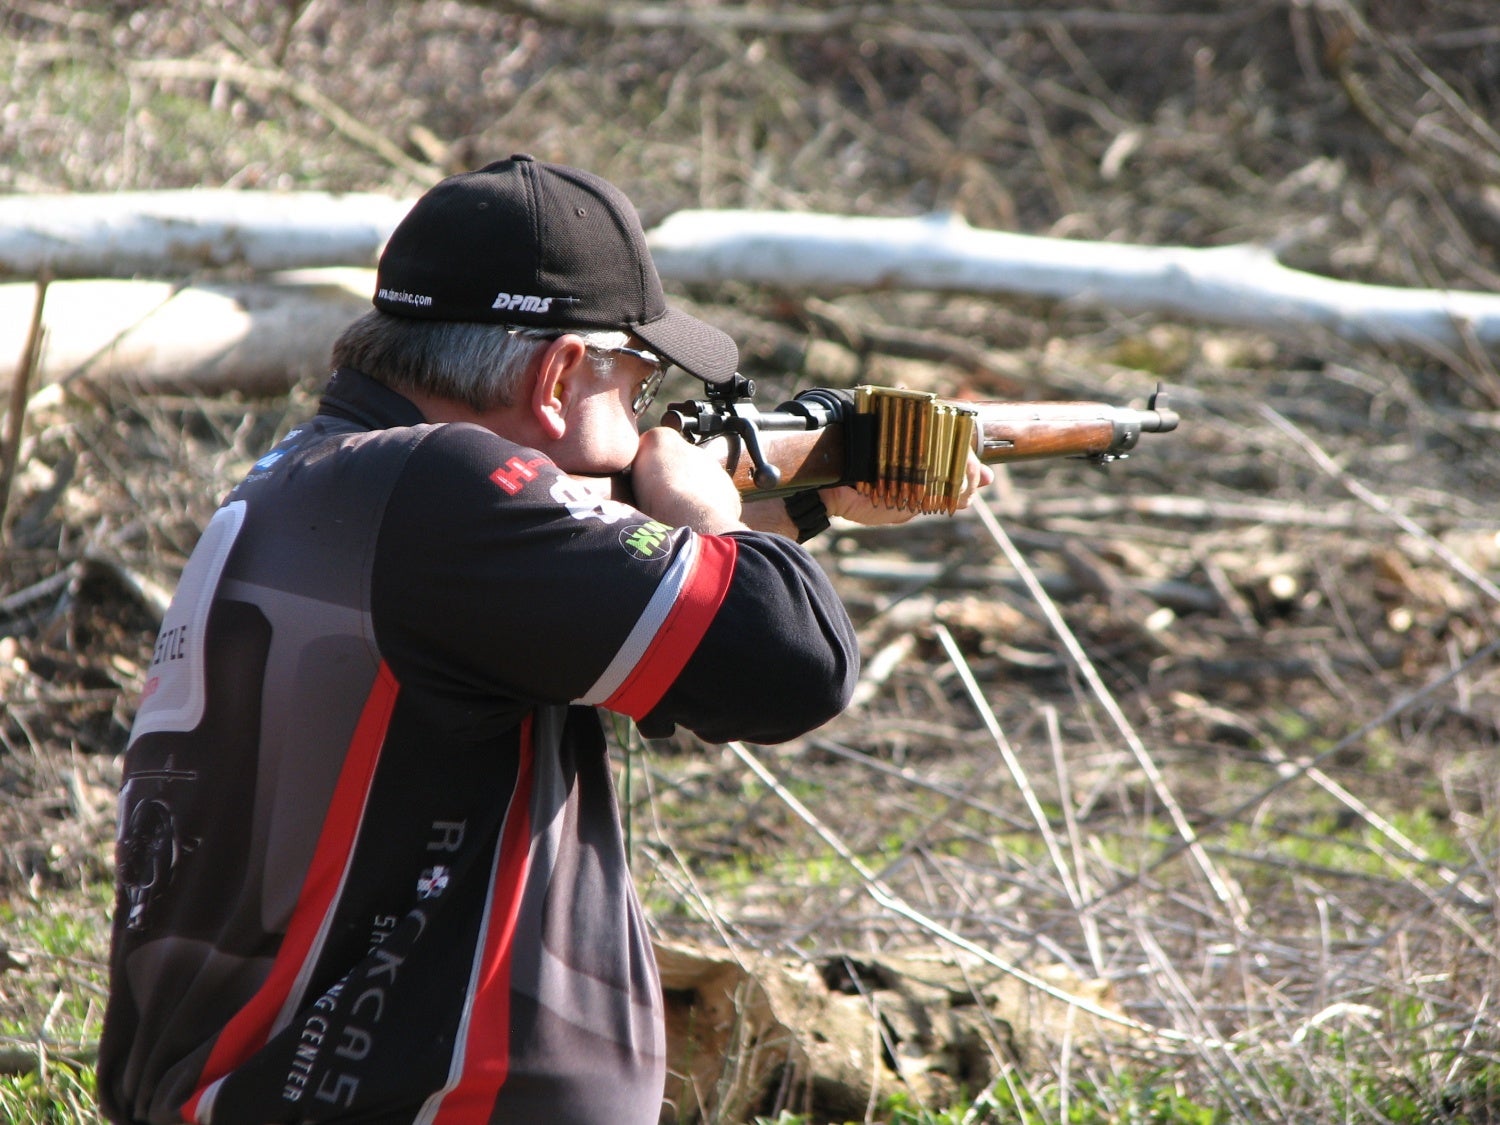 One of the participants in the Military Rifle Competition from April 2010.